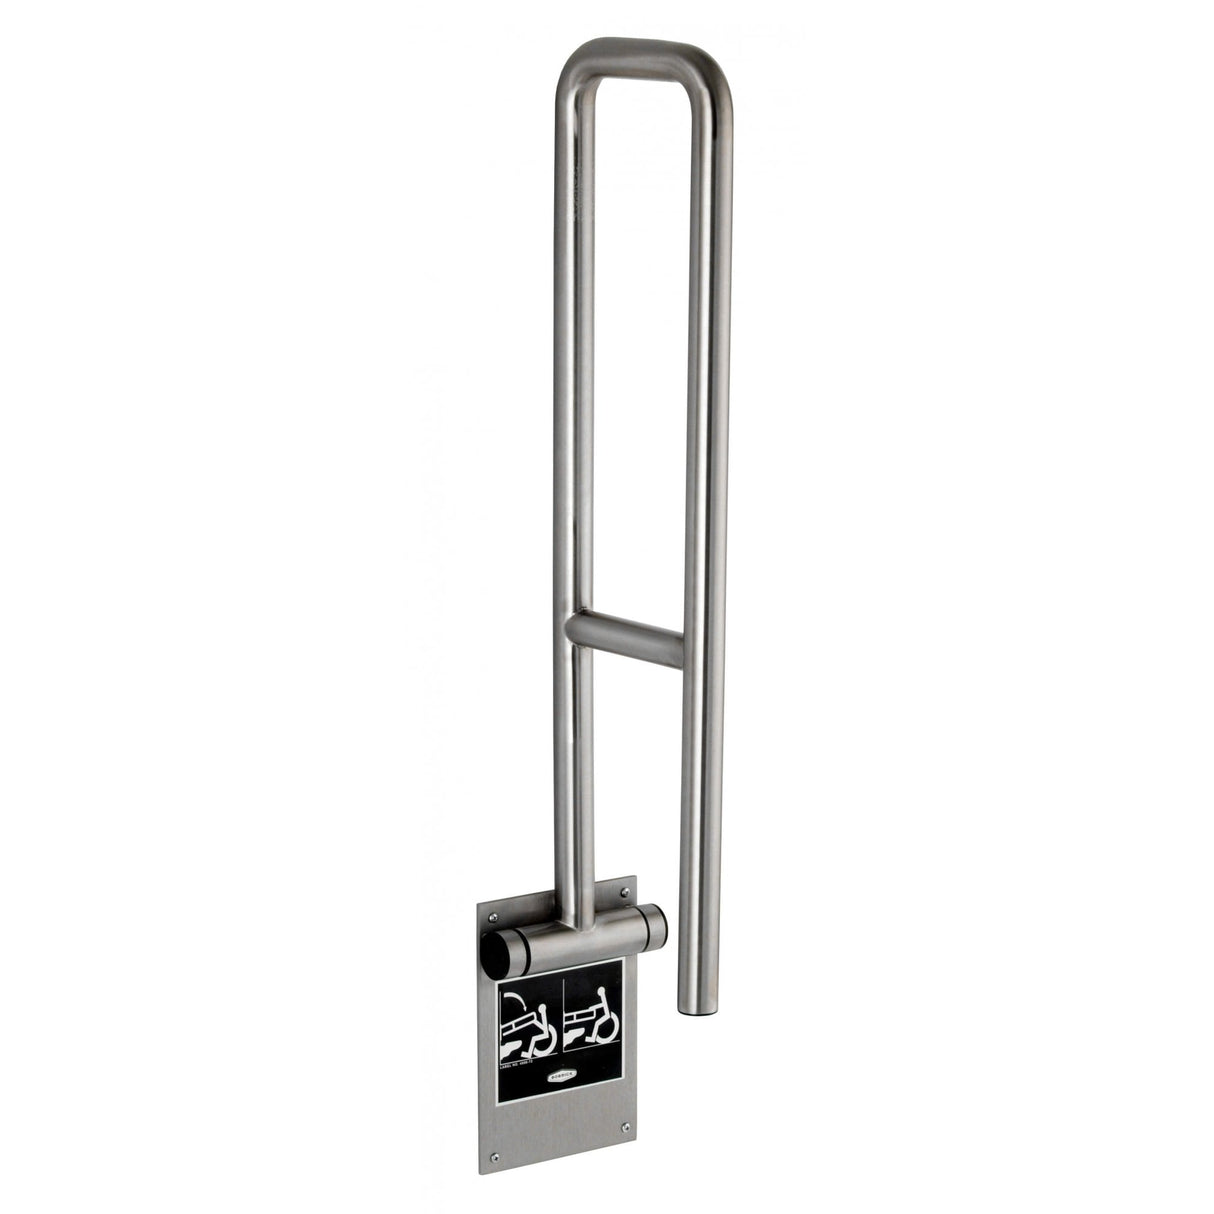 B-4998.99 735mm Stainless Steel Drop-down Grab Bar with Peened Finish